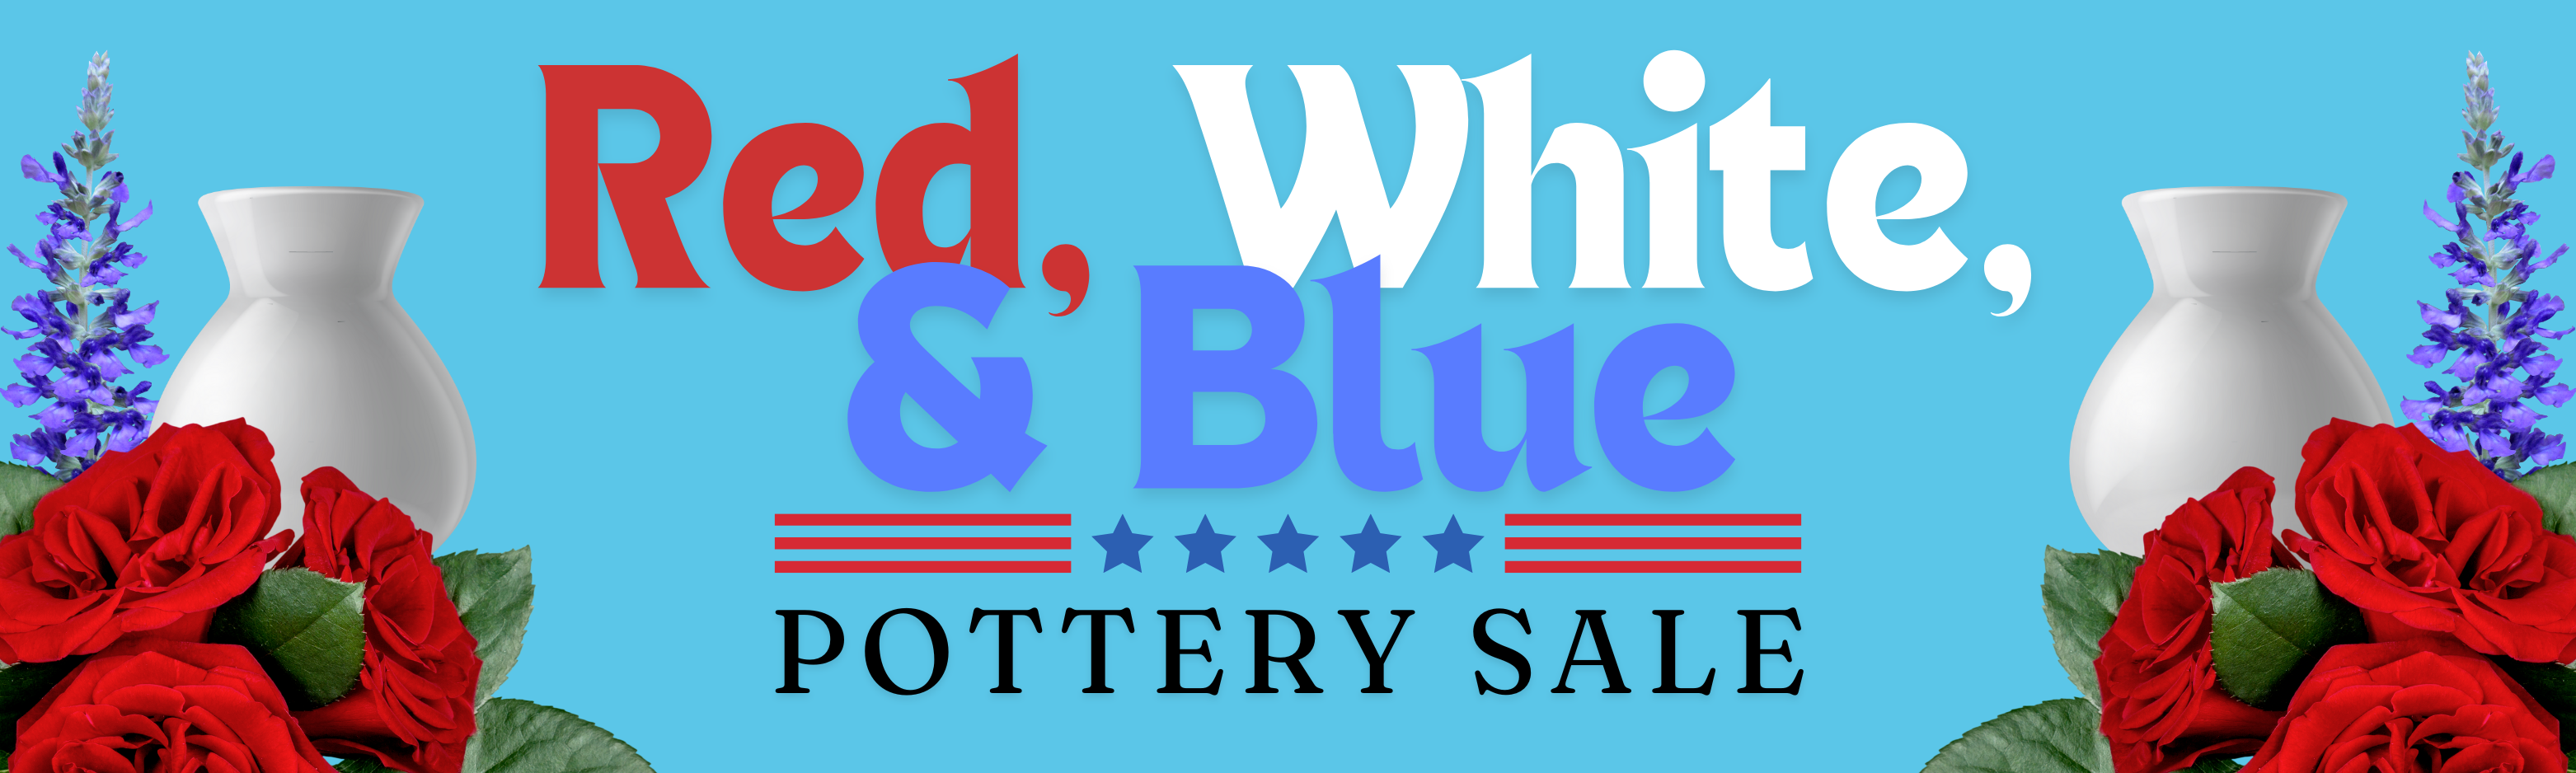 Red White and Blue Pottery Sale